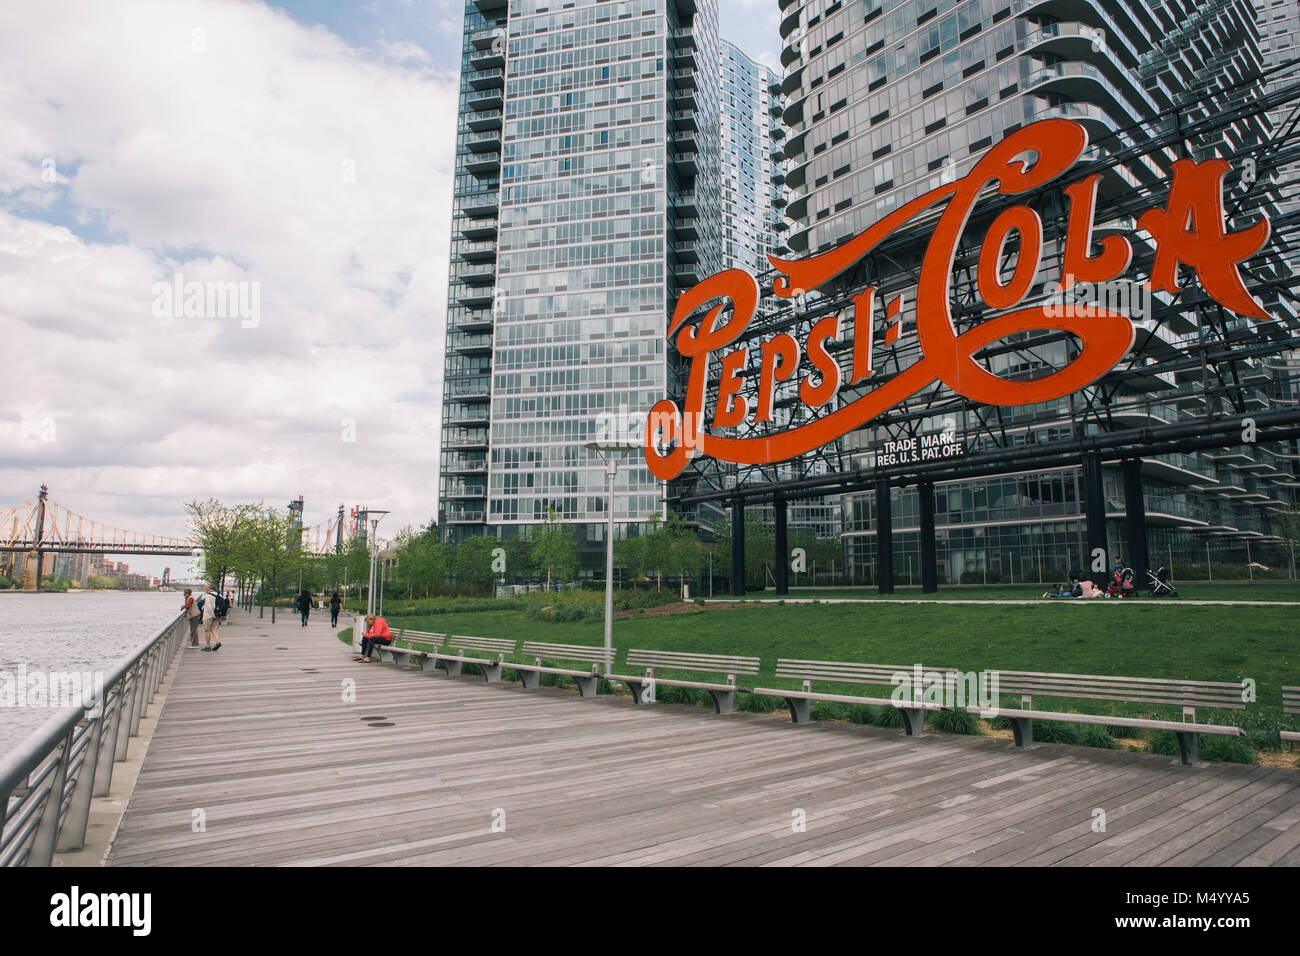 People on promenade boardwalk near iconic sign in Gantry Plaza State Park with view of Queensborough Ed Koch Bridge in distance, Long Island City, New York City, USA Stock Photo